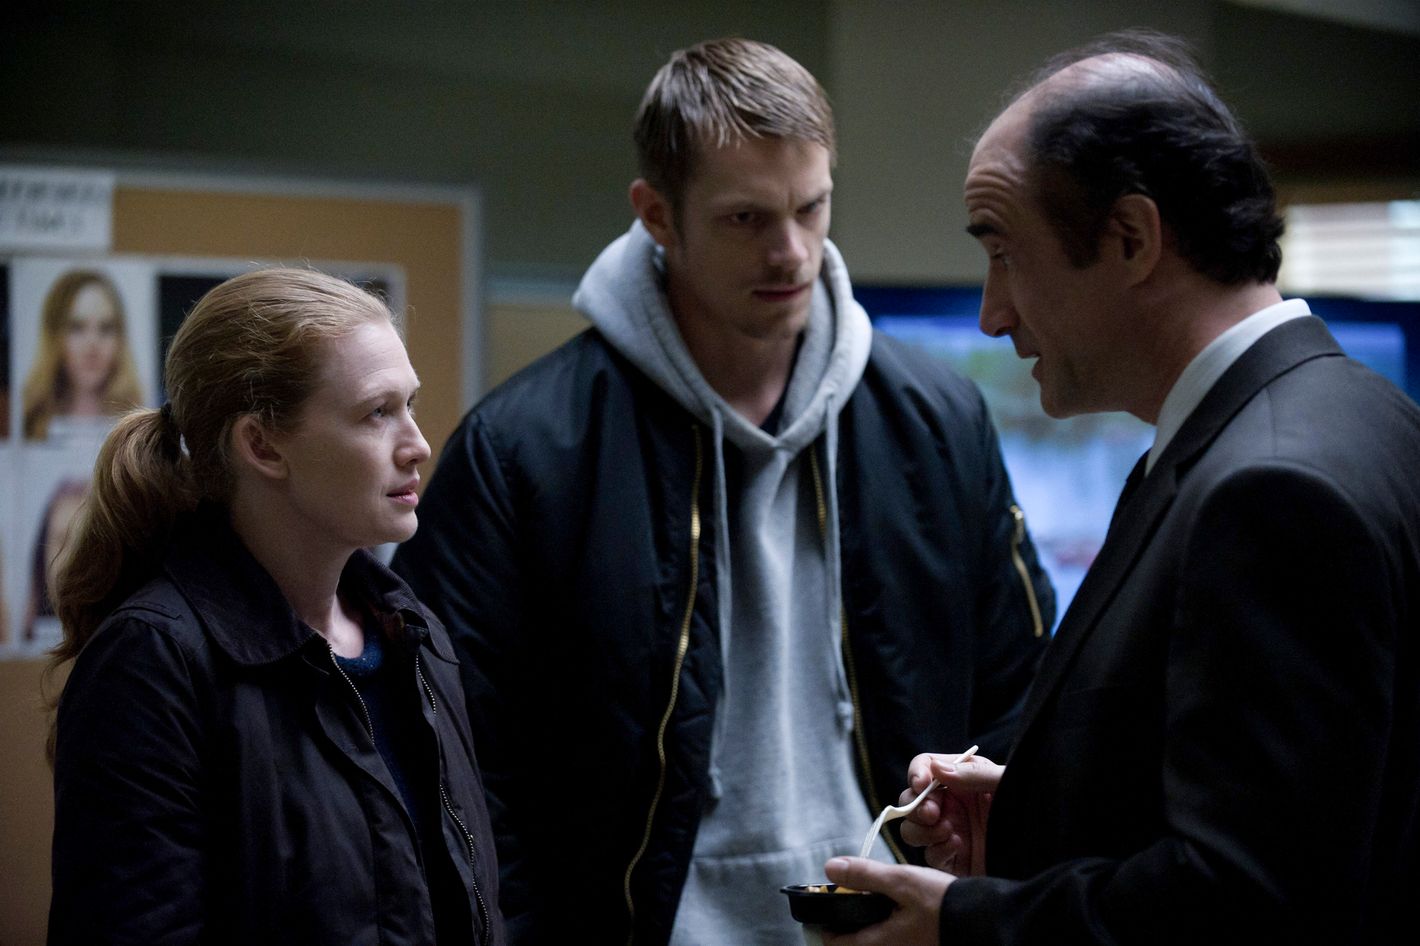 The Killing' on Netflix: Romance for Linden and Holder in Final